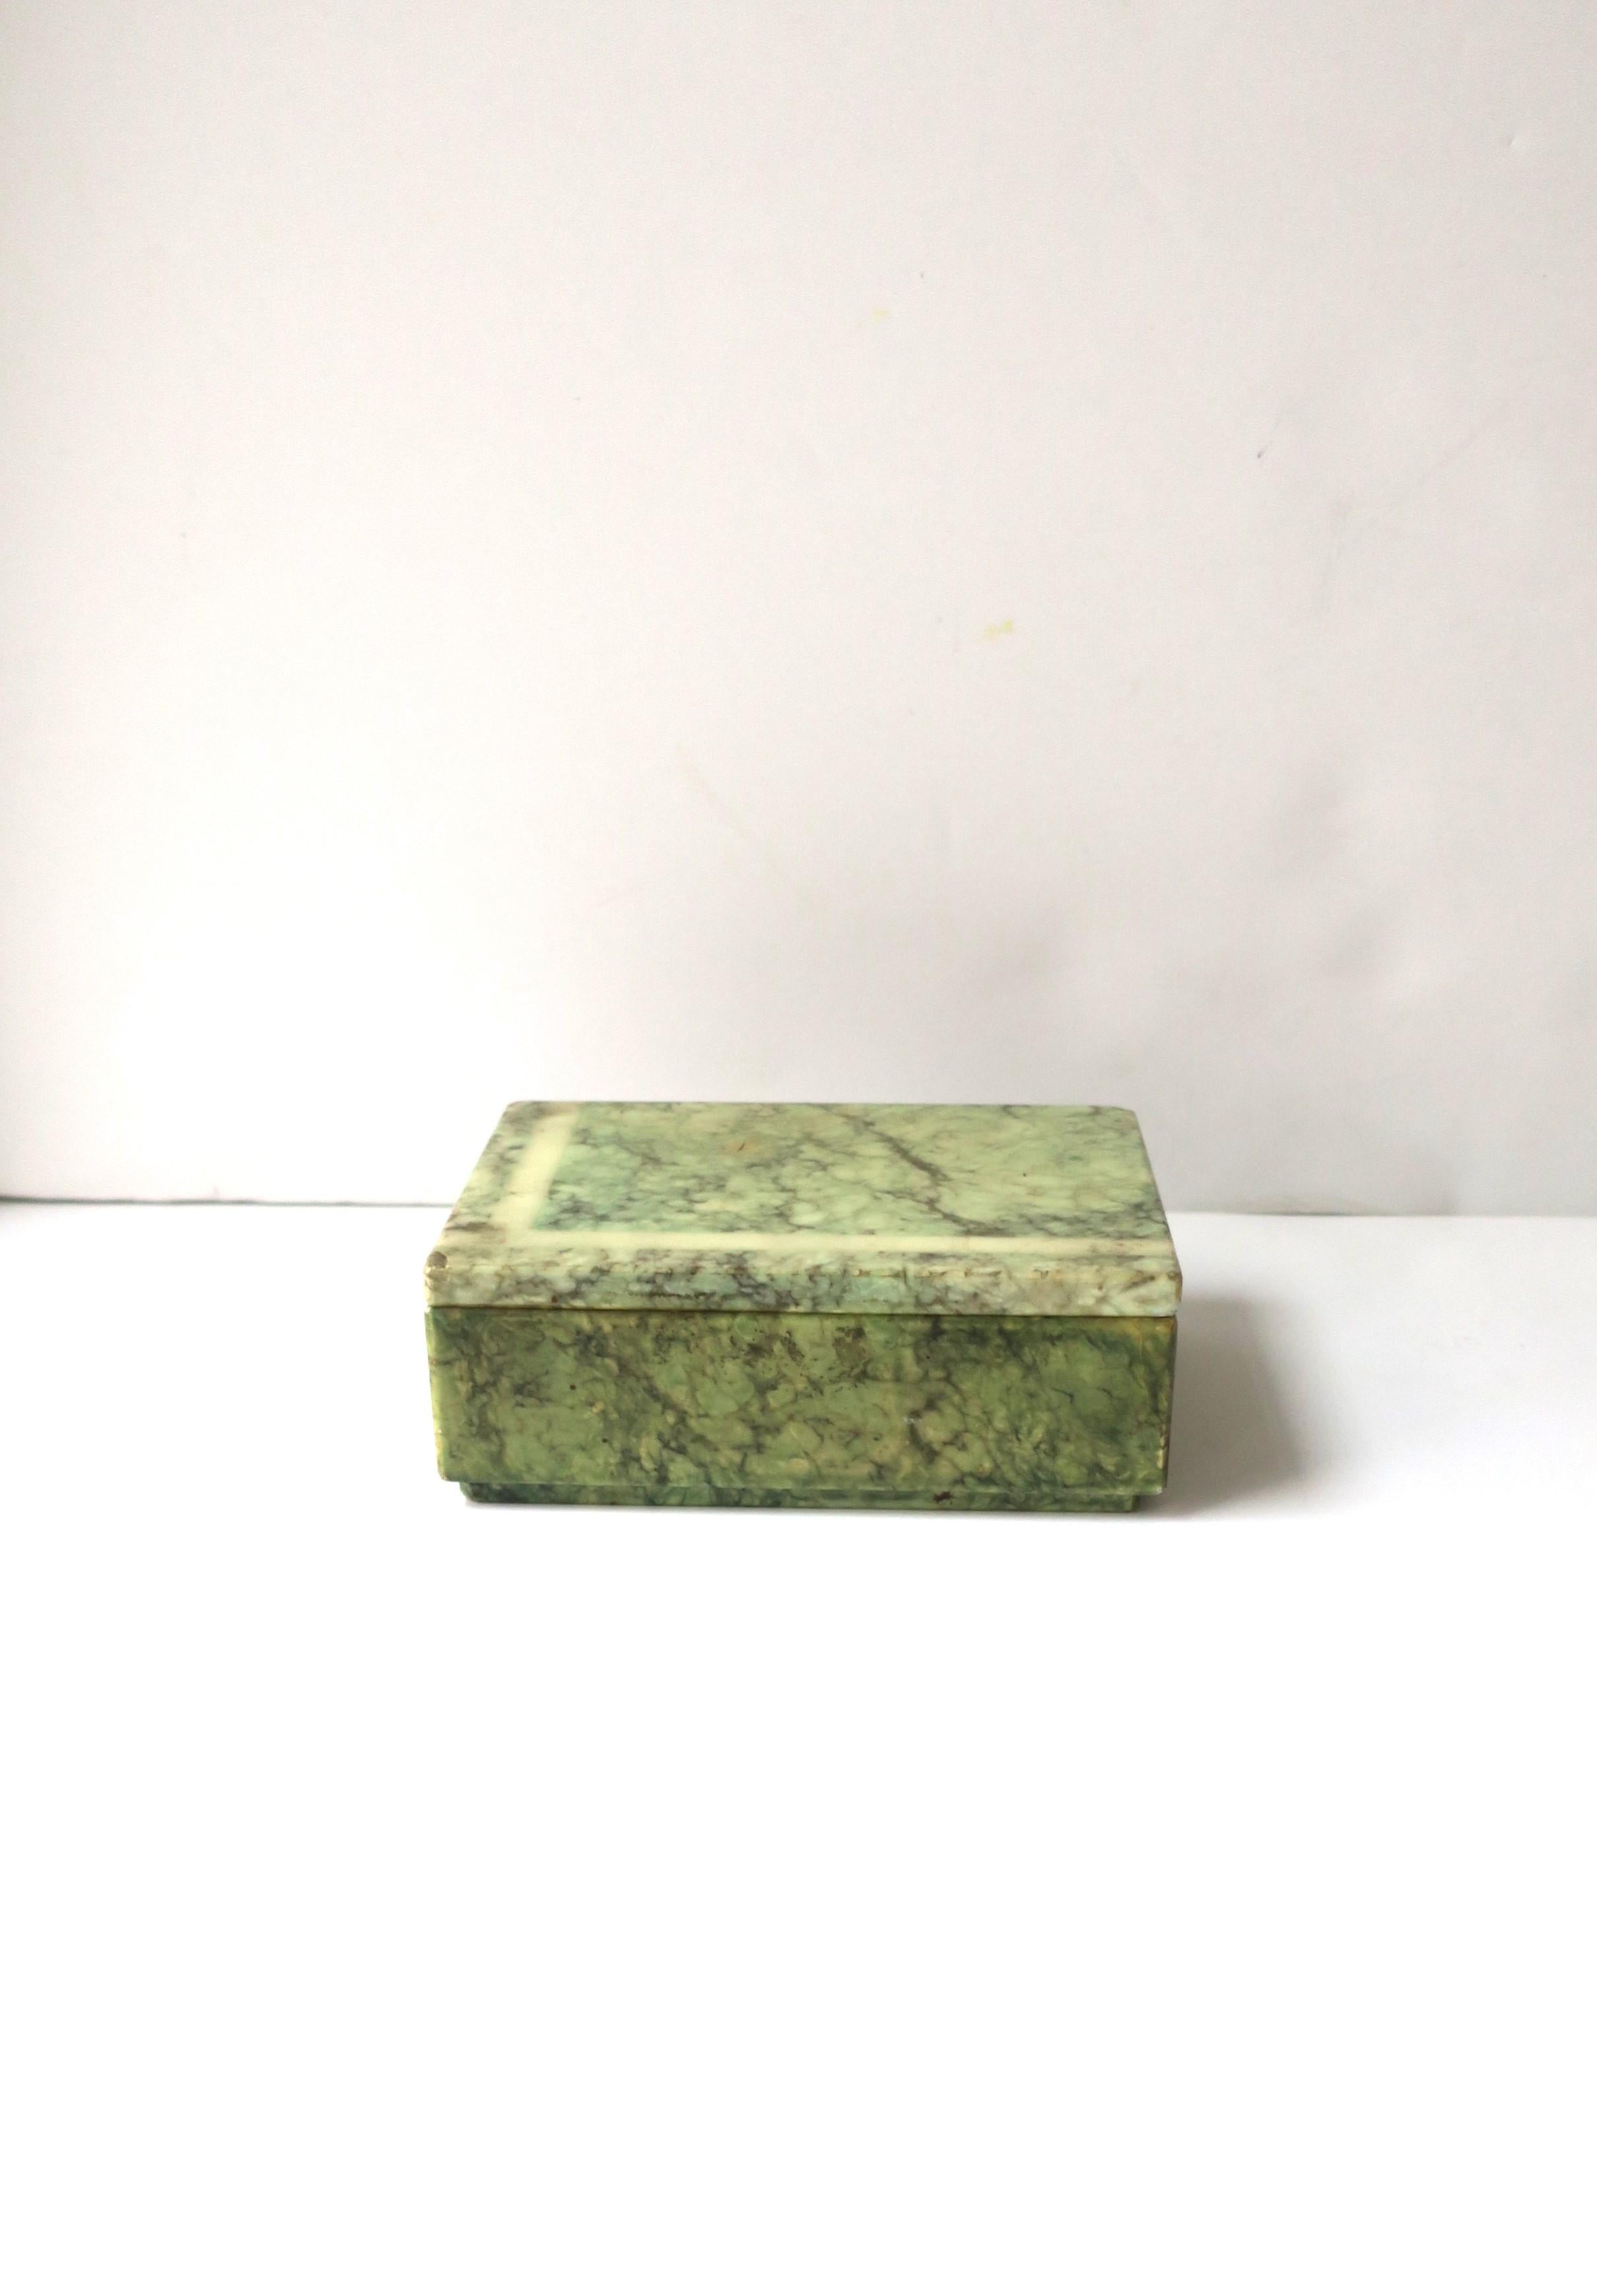 Dyed Italian Green Alabaster Marble Jewelry or Decorative Box, circa 1970s For Sale